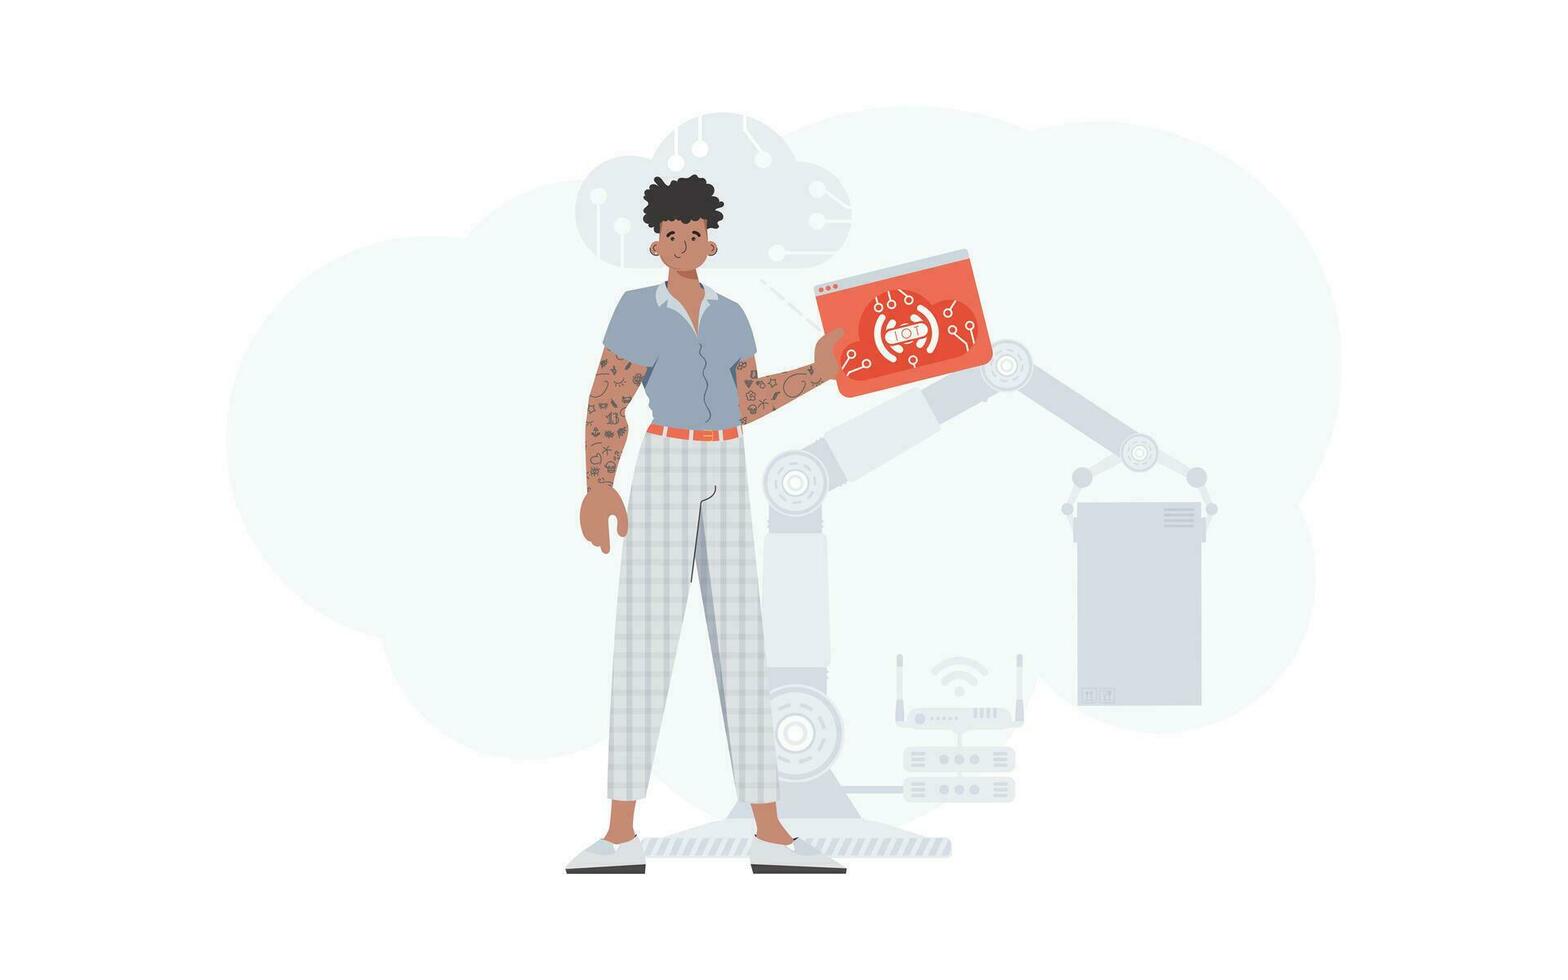 The guy is holding an internet thing icon in his hands. Internet of things concept. Good for presentations and websites. Vector illustration.